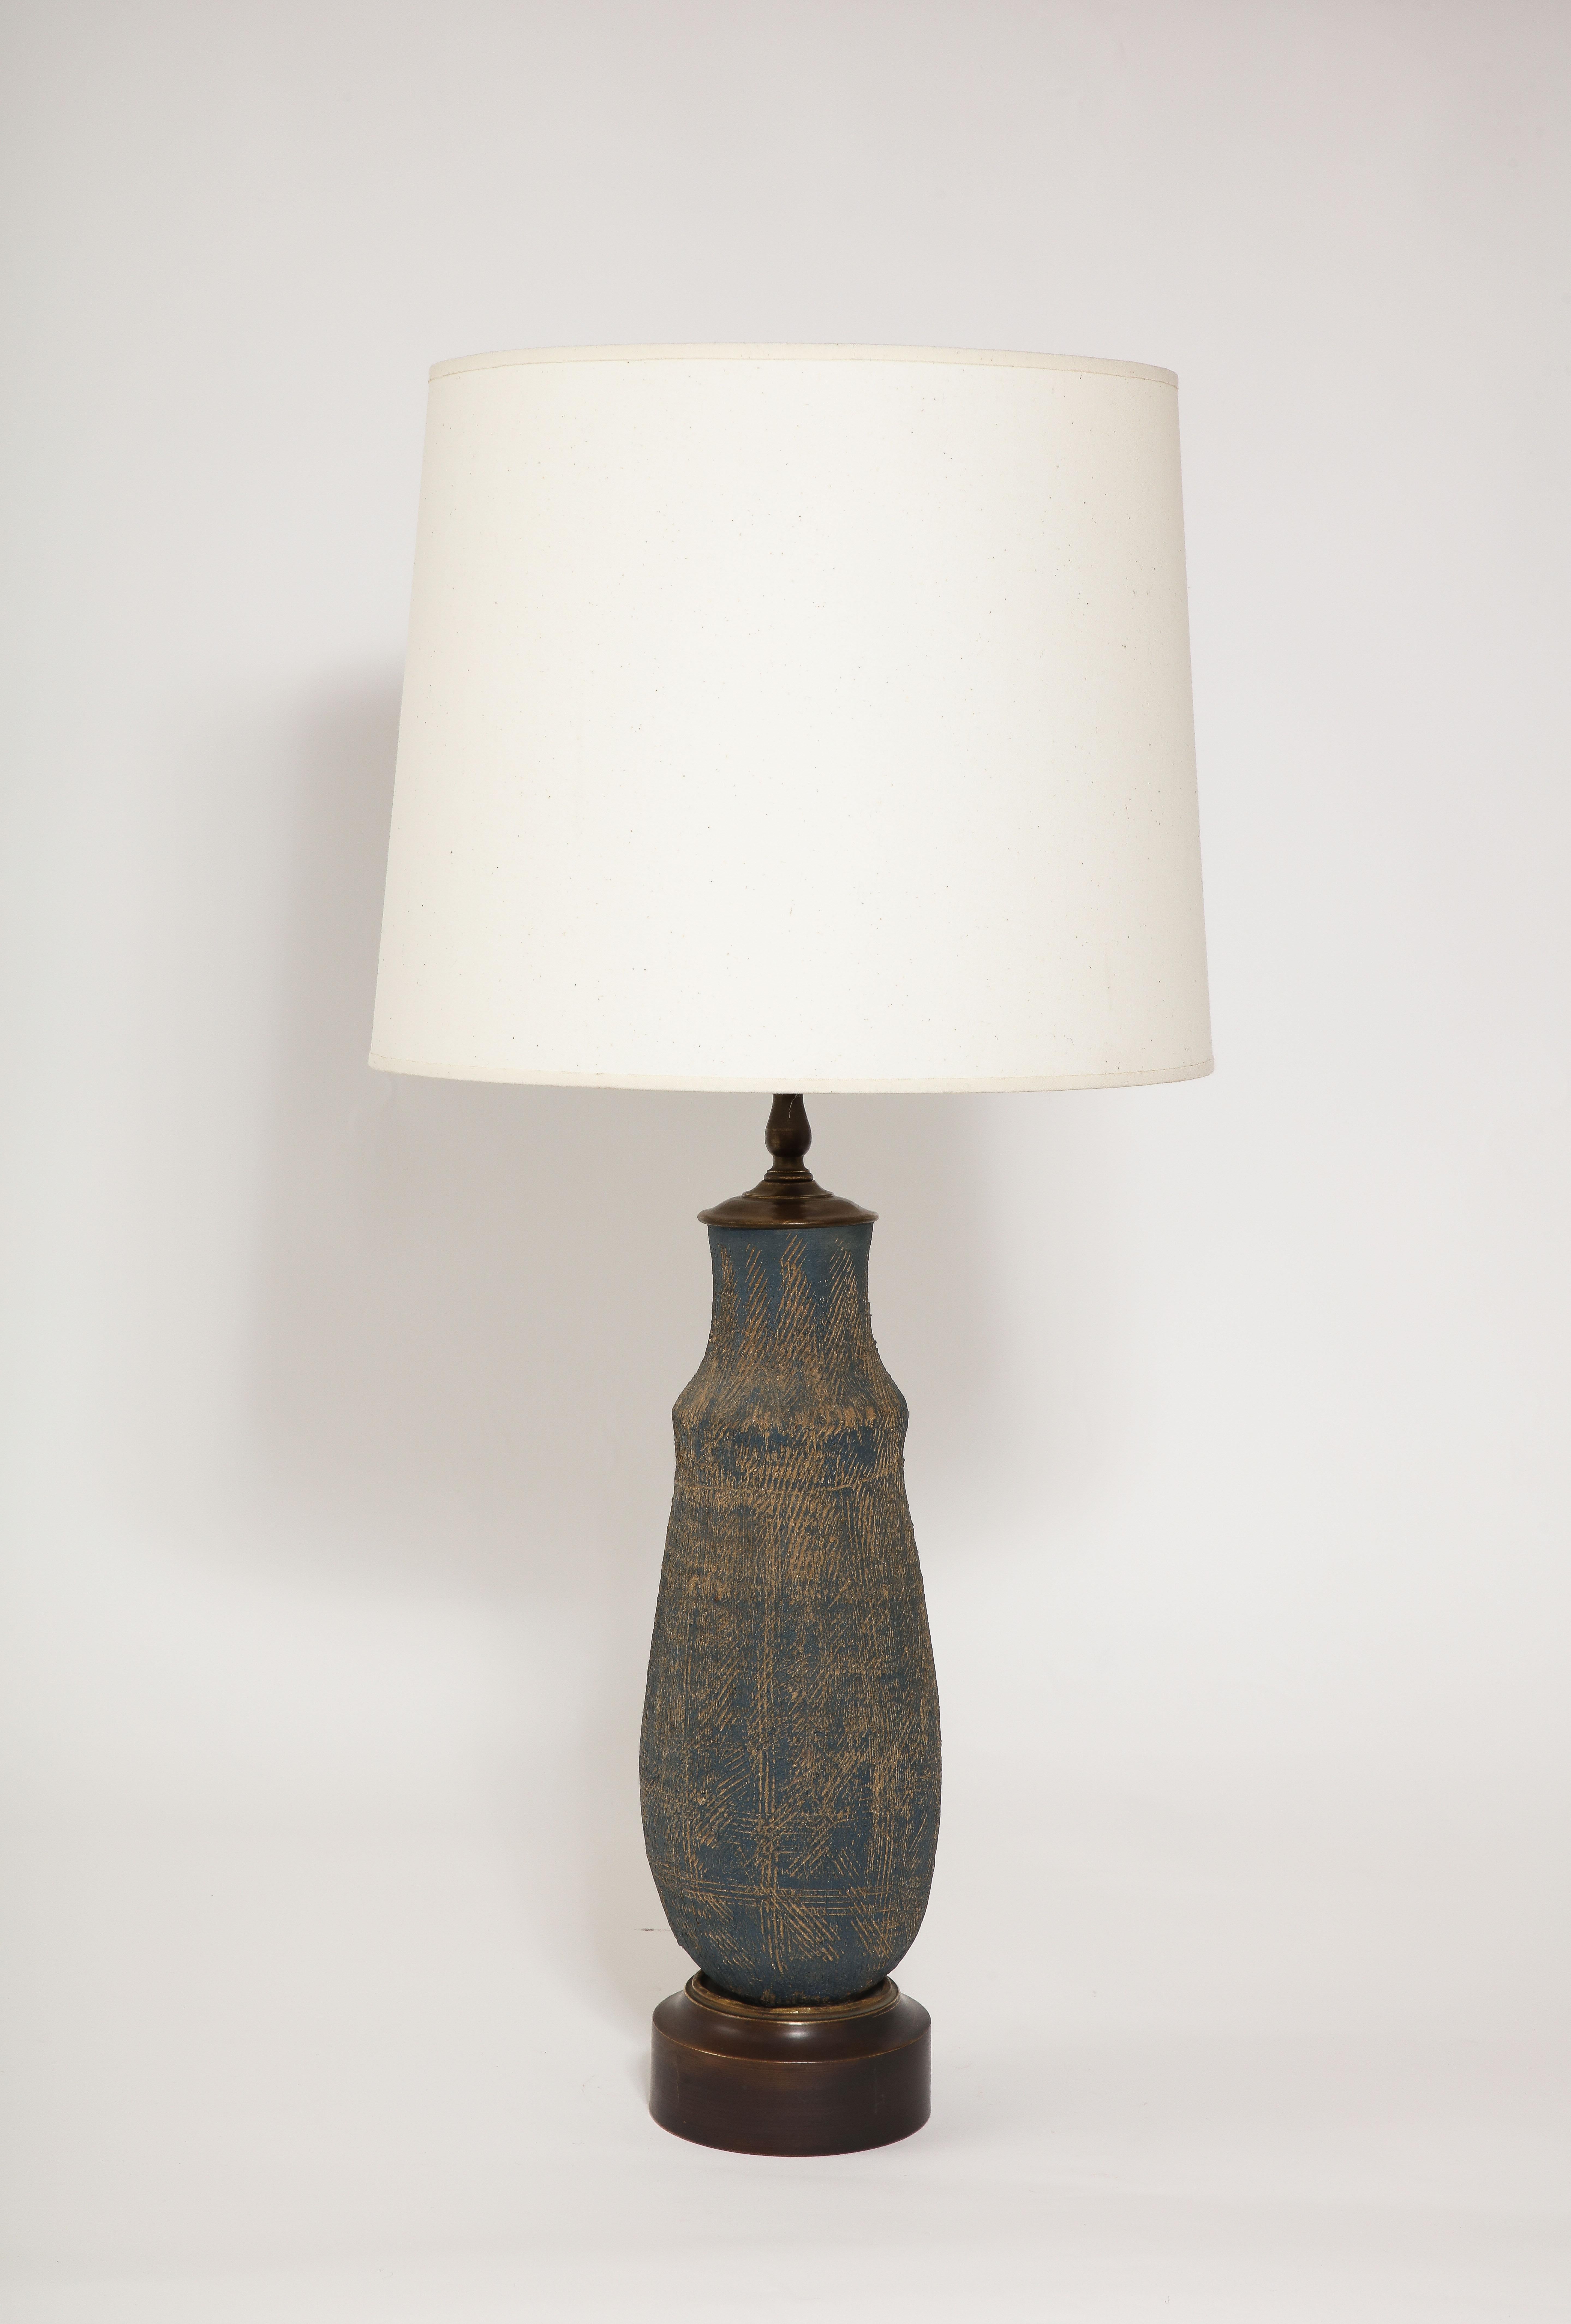 Incised Ceramic Table lamp, USA 1950's For Sale 4